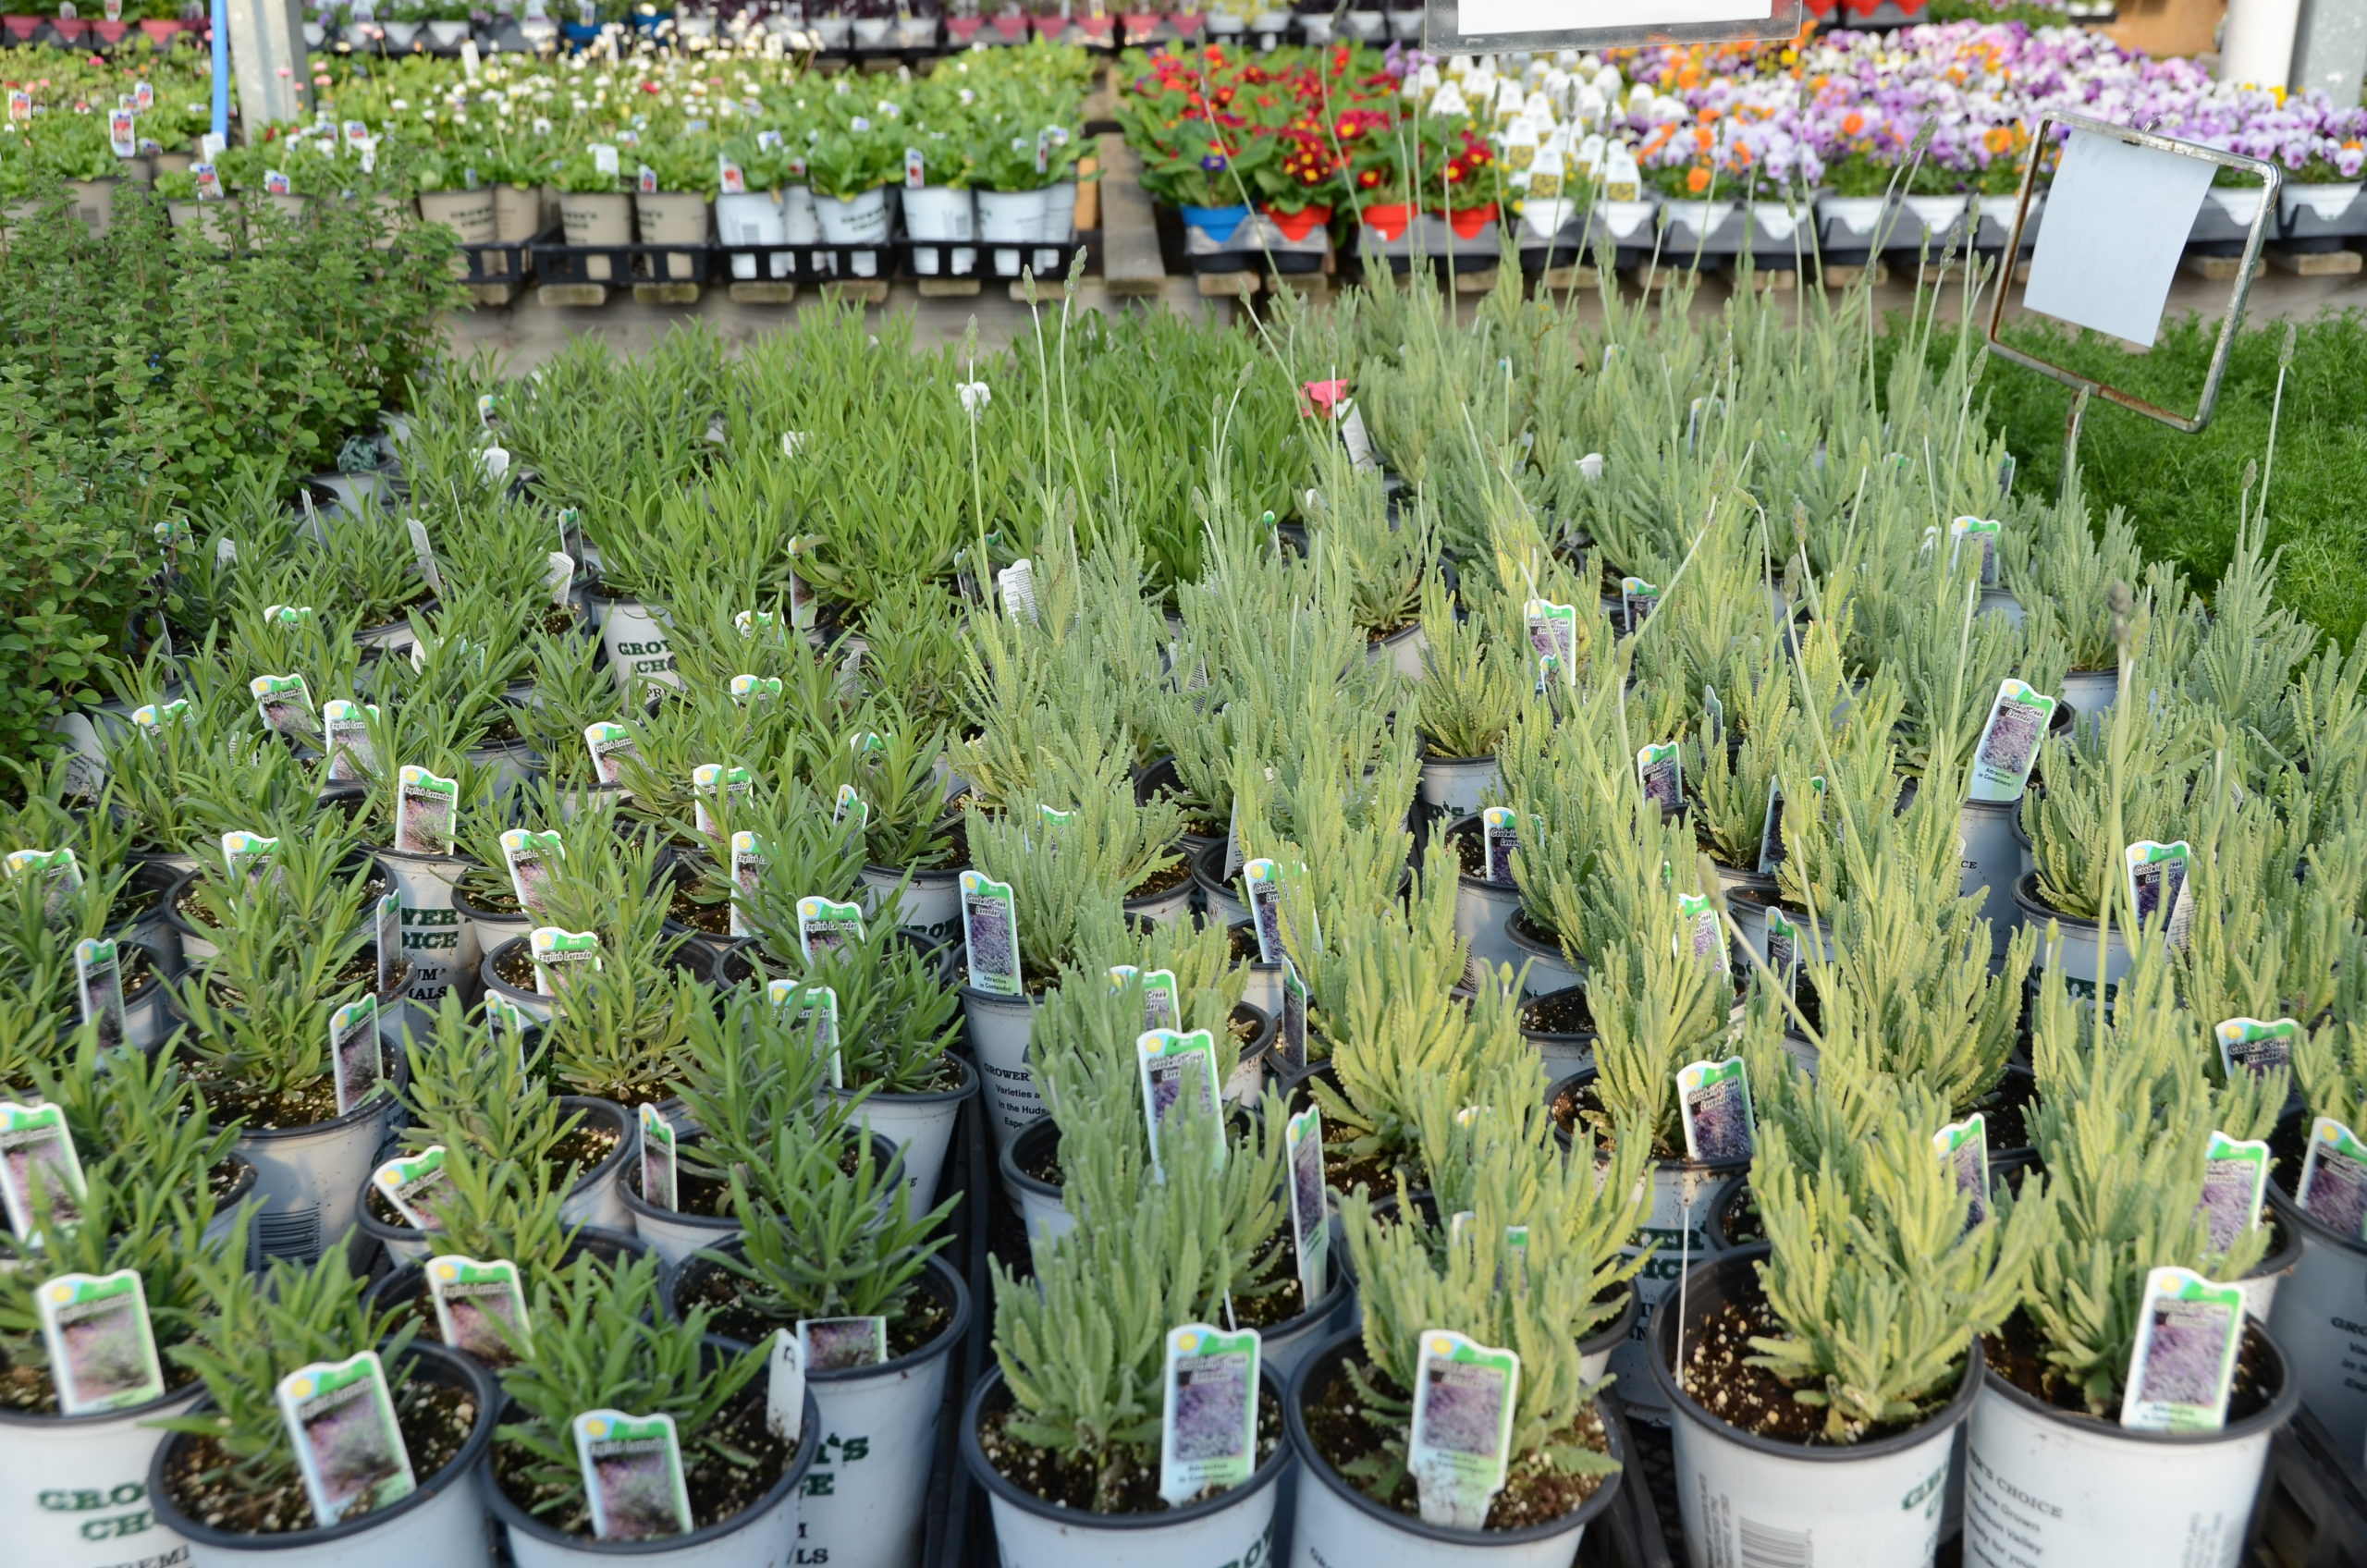 Potted lavender will start to show up in garden centers in May. They are usually available in several sizes from 4-inch pots up to gallon pots. ANDREW MESSINGER